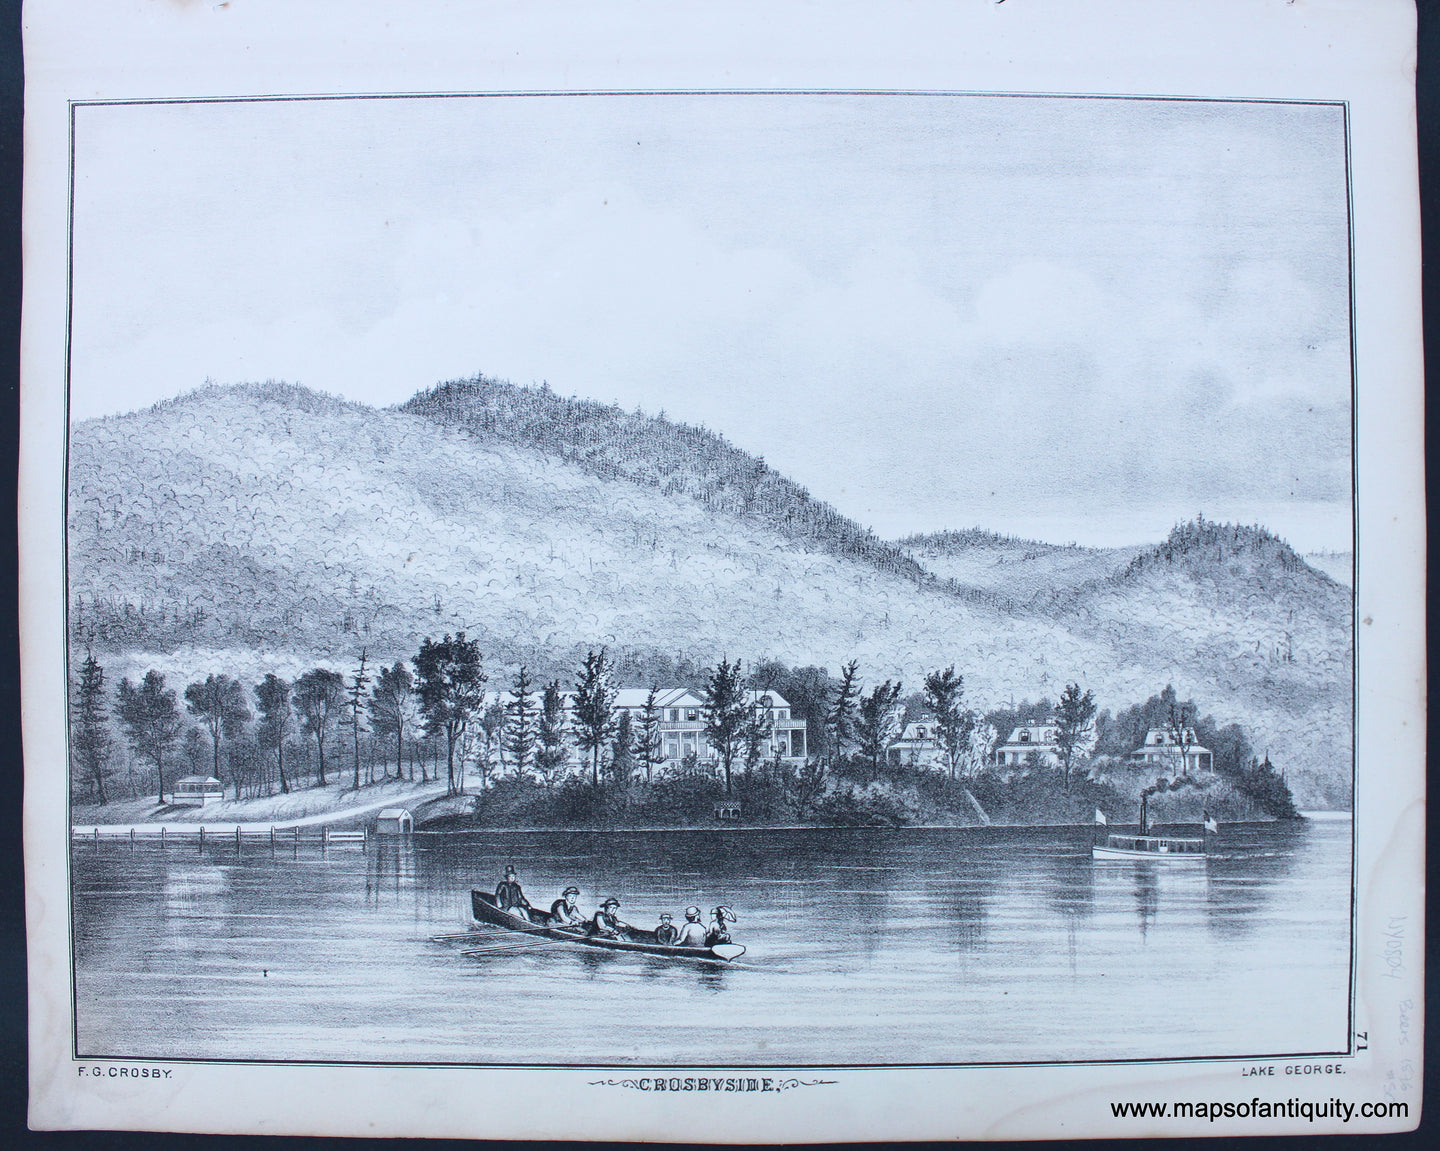 Antique-Black-and-White-Illustration-Crosbyside-Lake-George-(NY)-1876-Beers-Northeast-New-York-State-1800s-19th-century-Maps-of-Antiquity